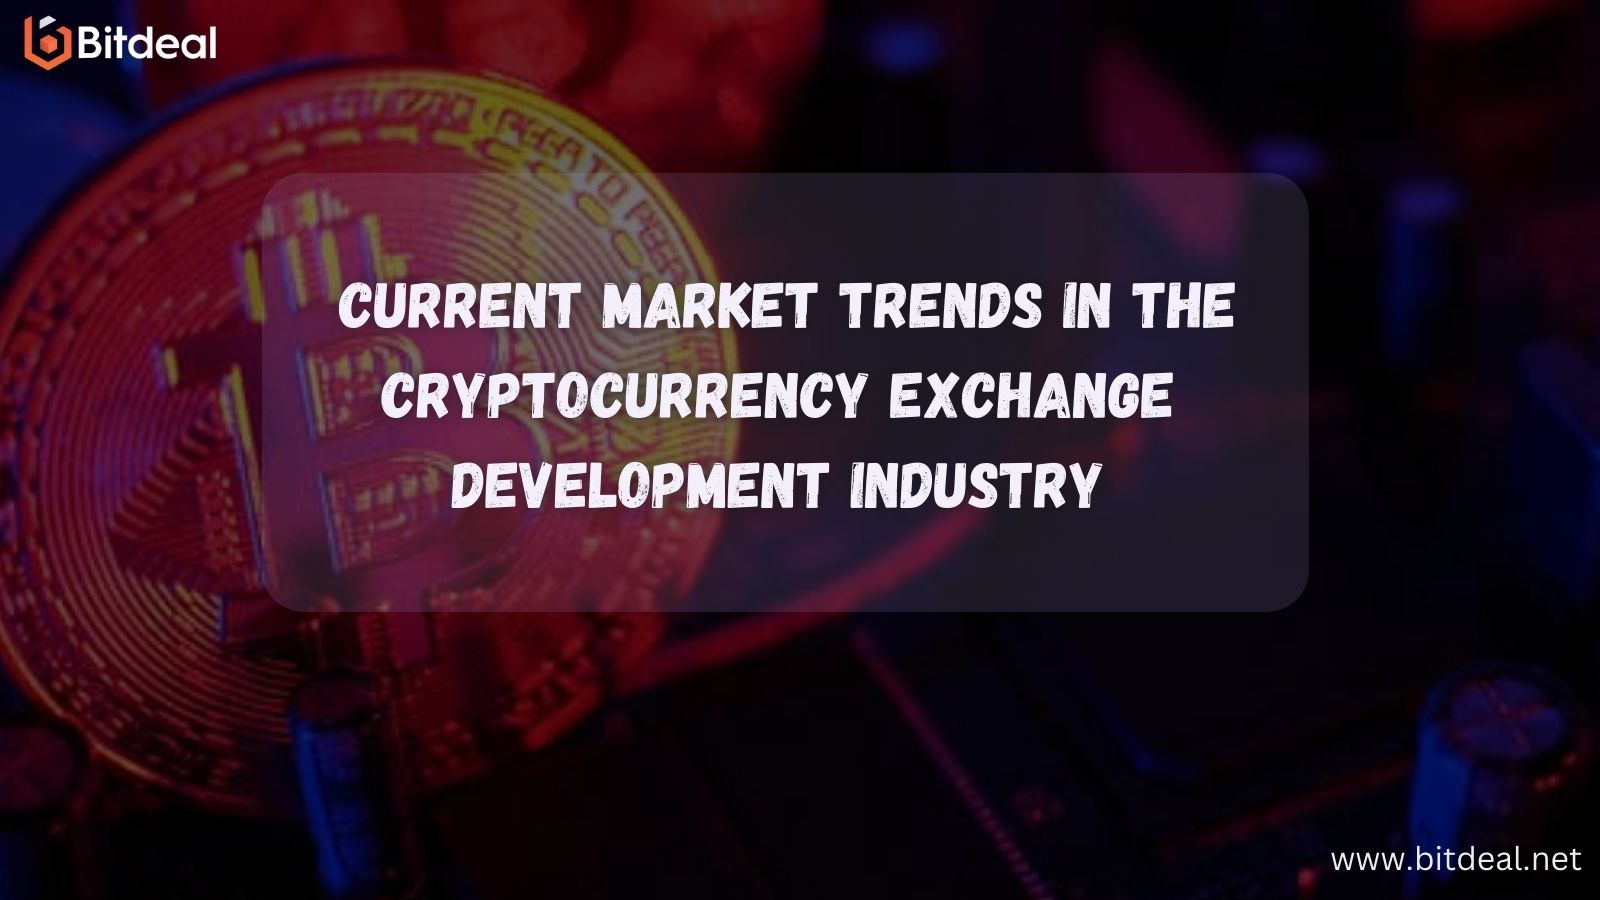 5 Steps to Understanding the Current Market Trends in the Cryptocurrency Exchange Development Industry